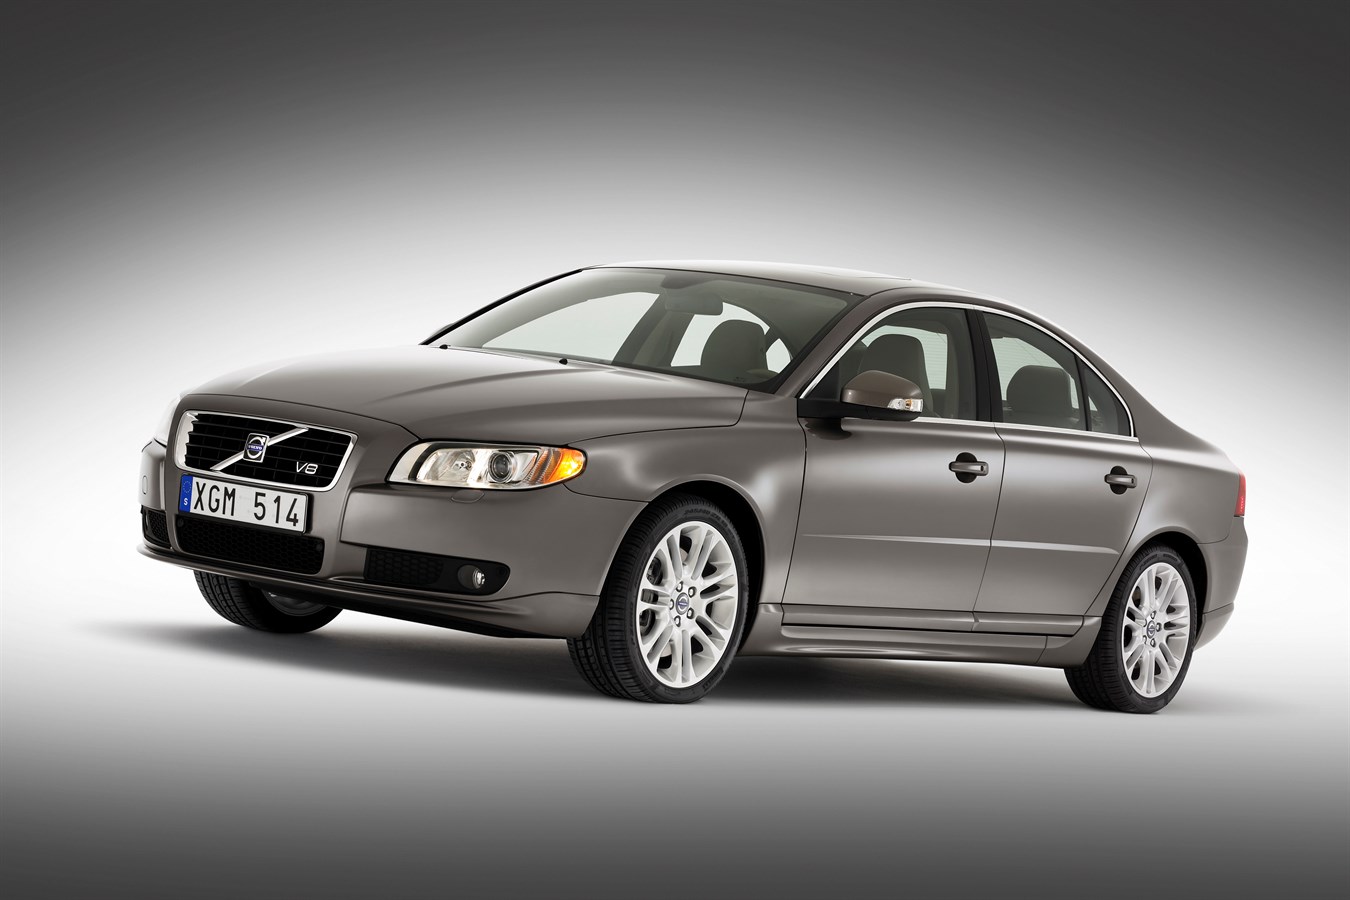 The all-new Volvo S80 - design and comfort, All-new Volvo S80 in  Scandinavian luxury packaging - Volvo Cars Global Media Newsroom